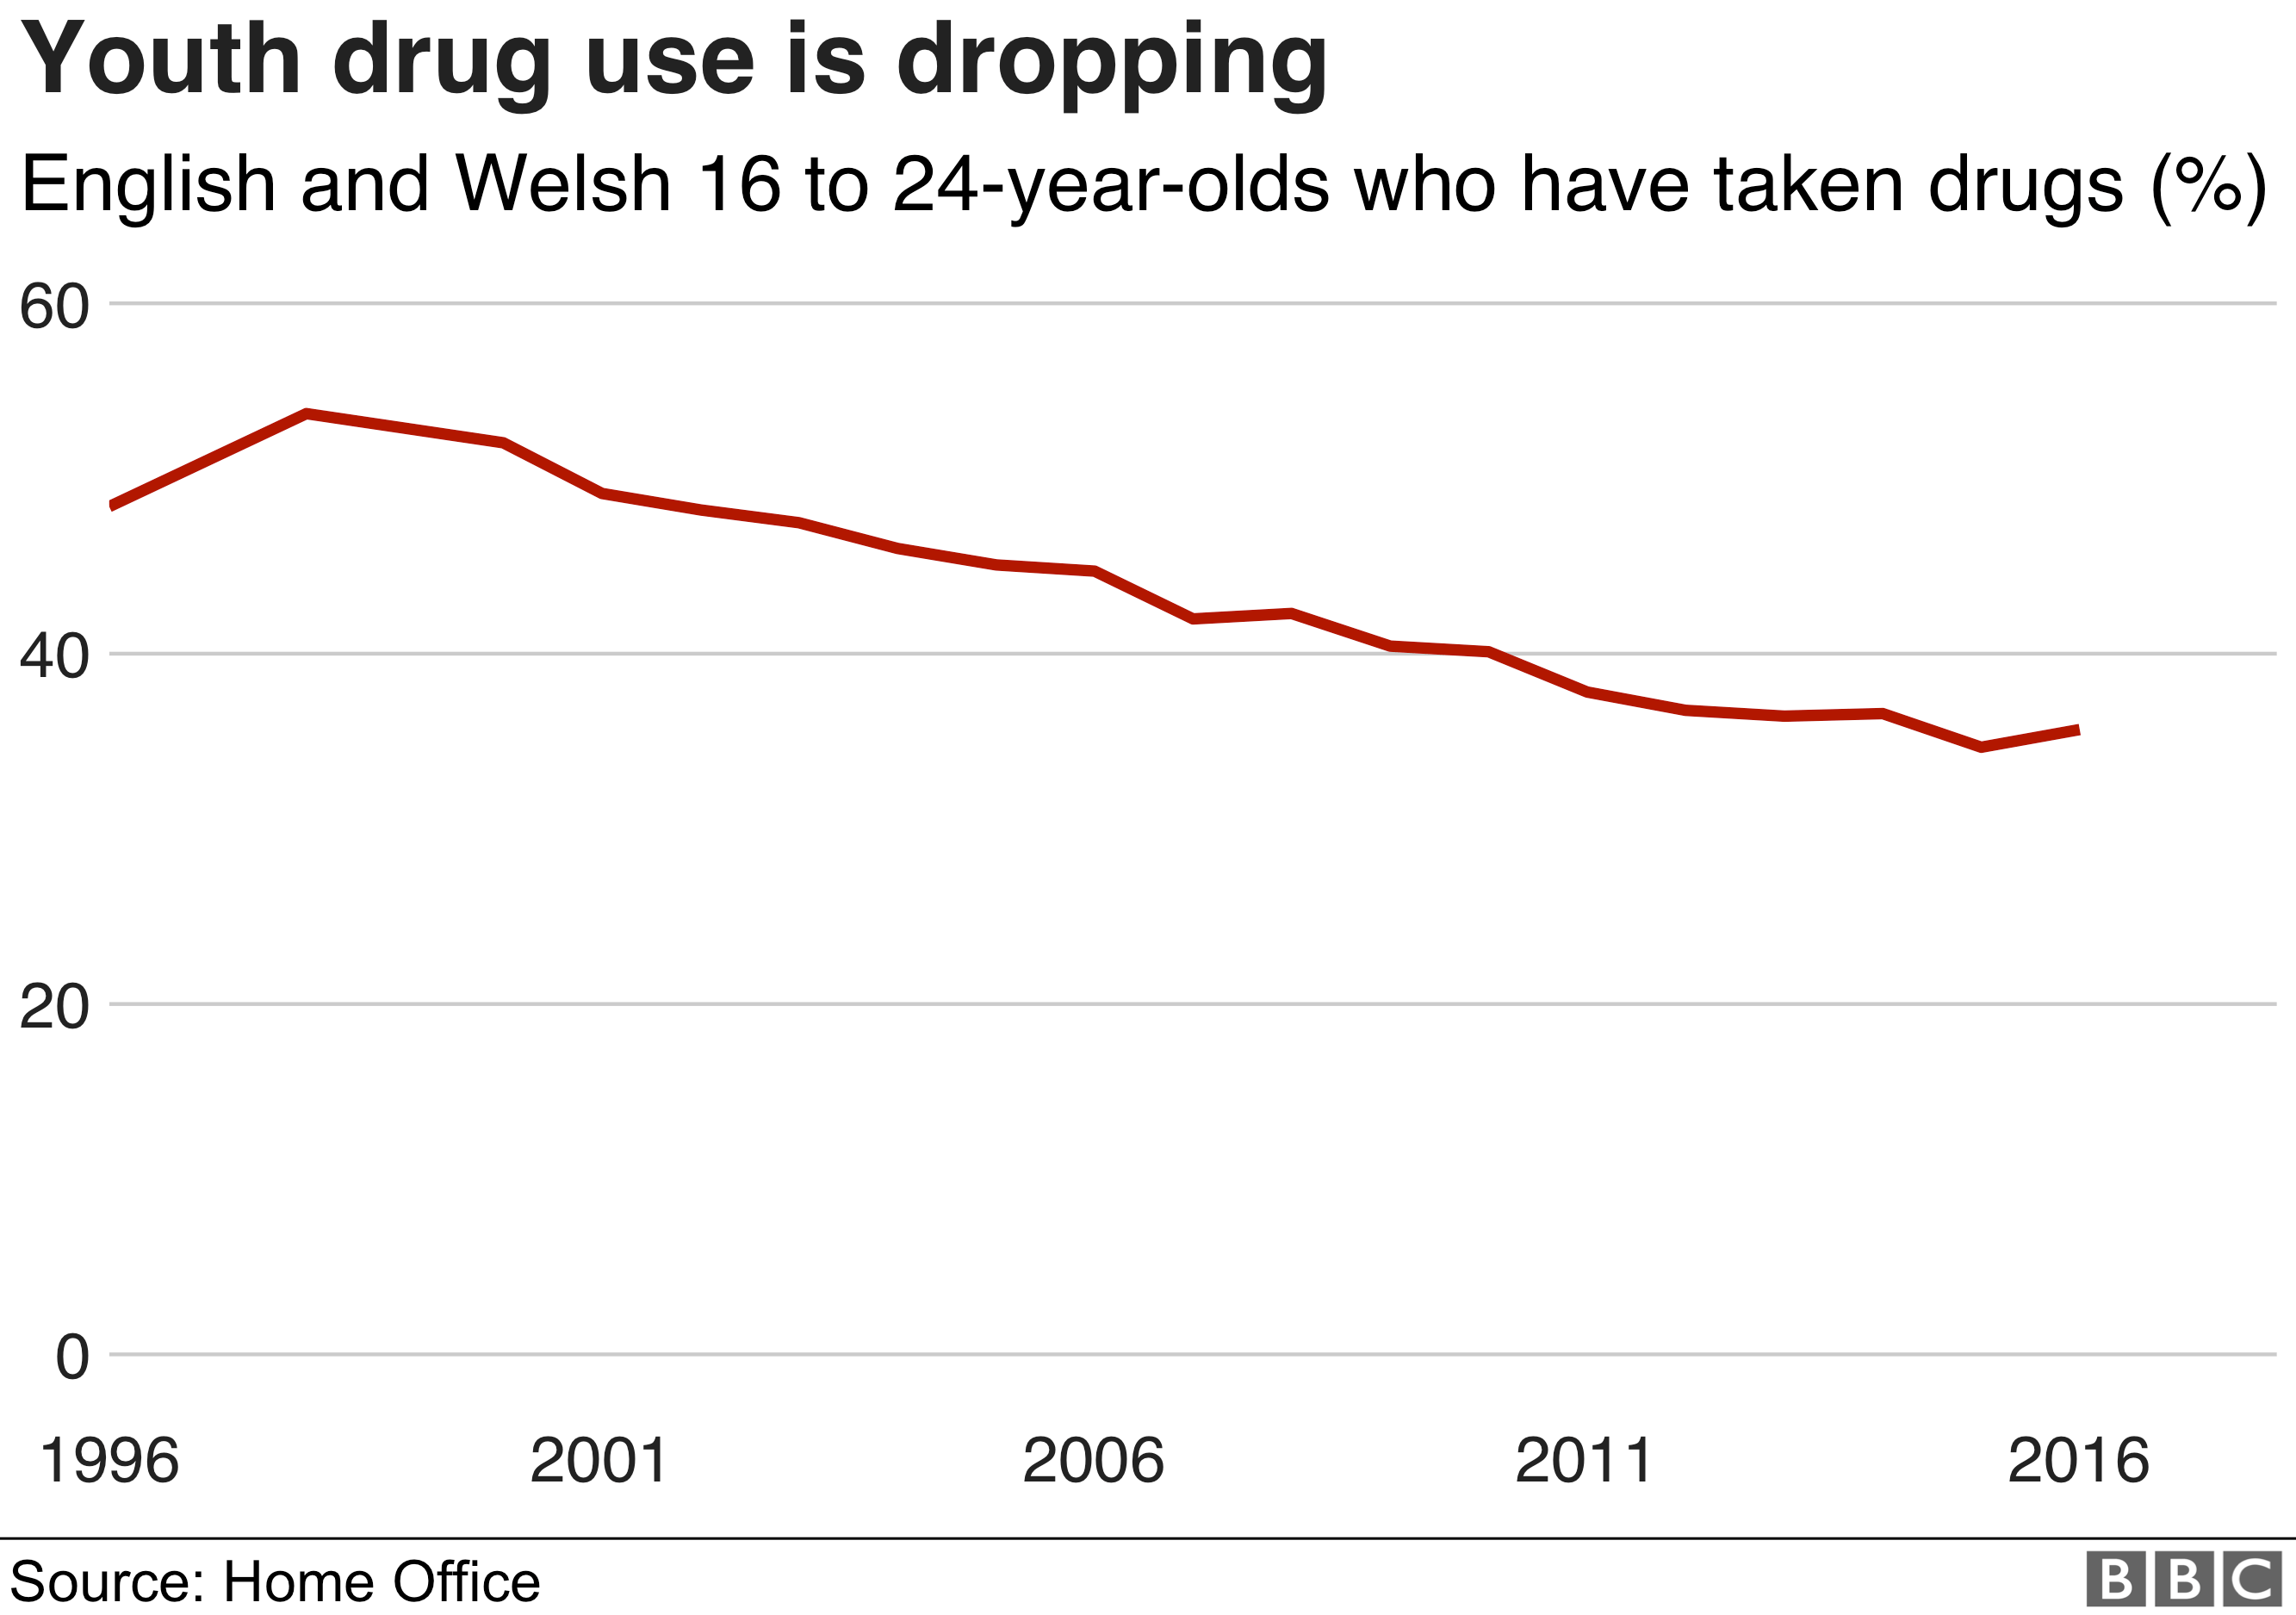 Chart showing a drop in youth drug use